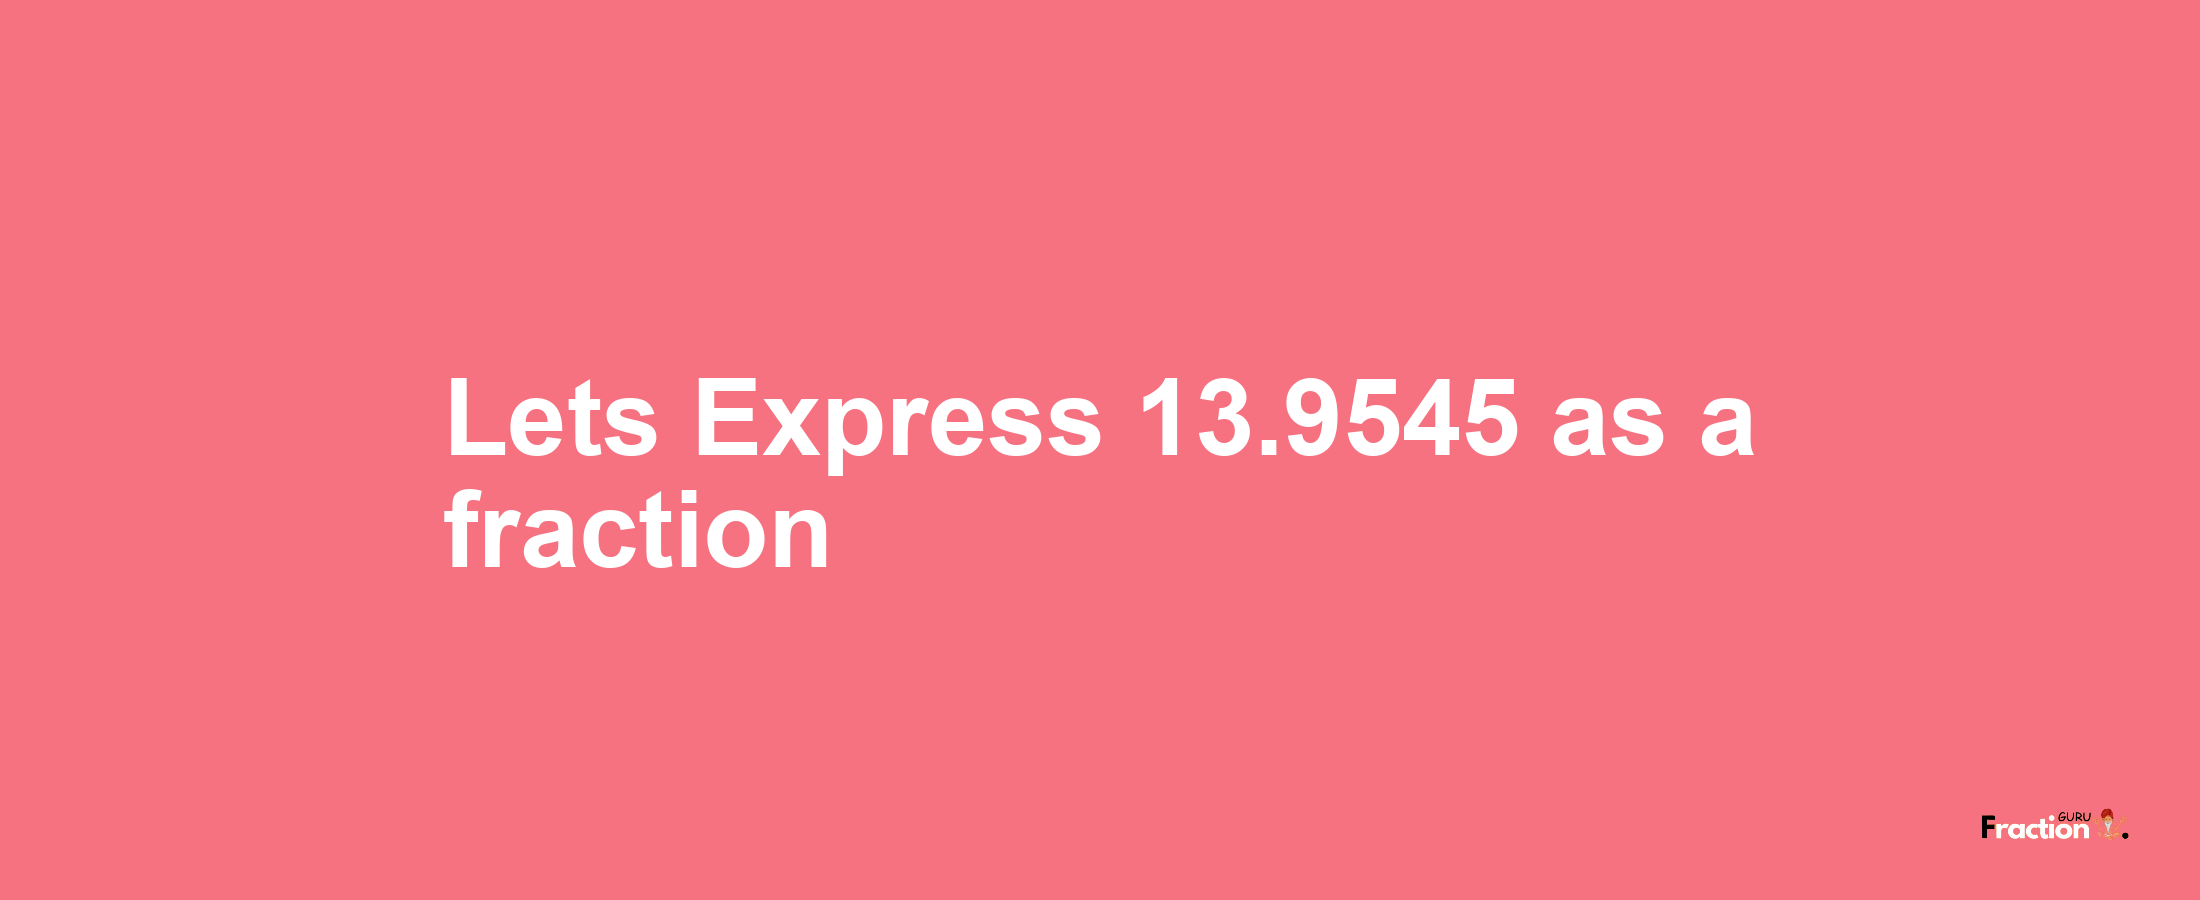 Lets Express 13.9545 as afraction